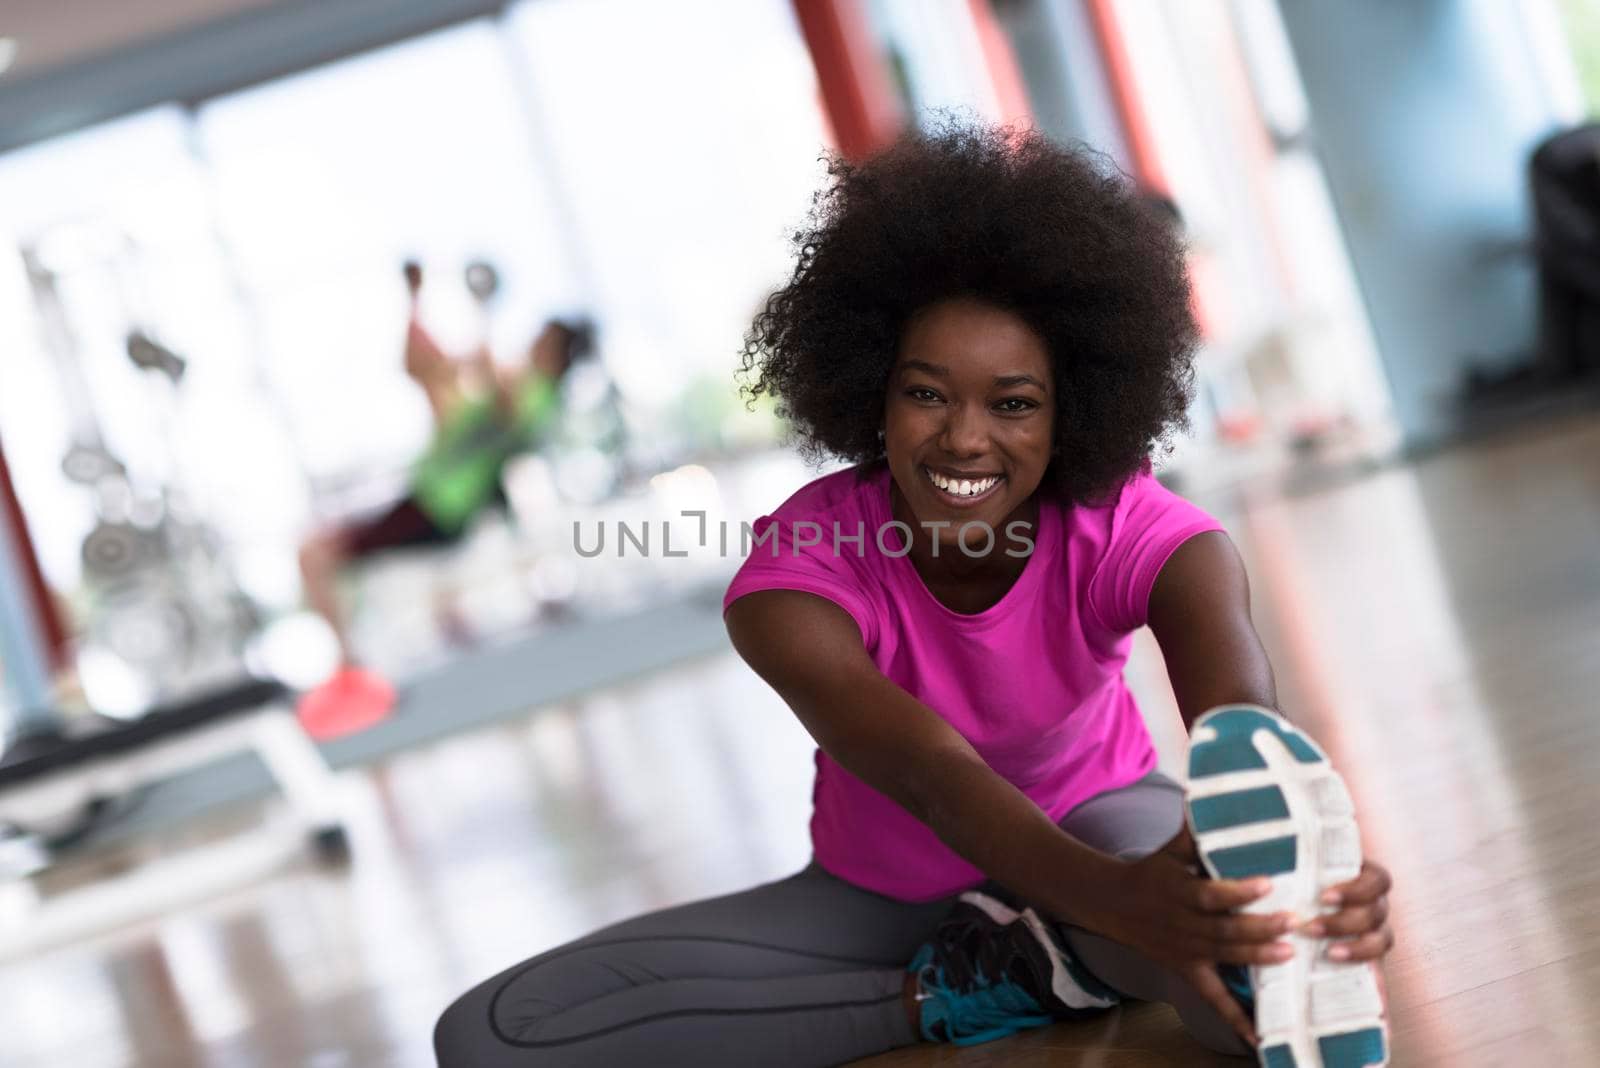 happy young african american woman in a gym stretching and warming up before workout young mab exercising with dumbbells in background